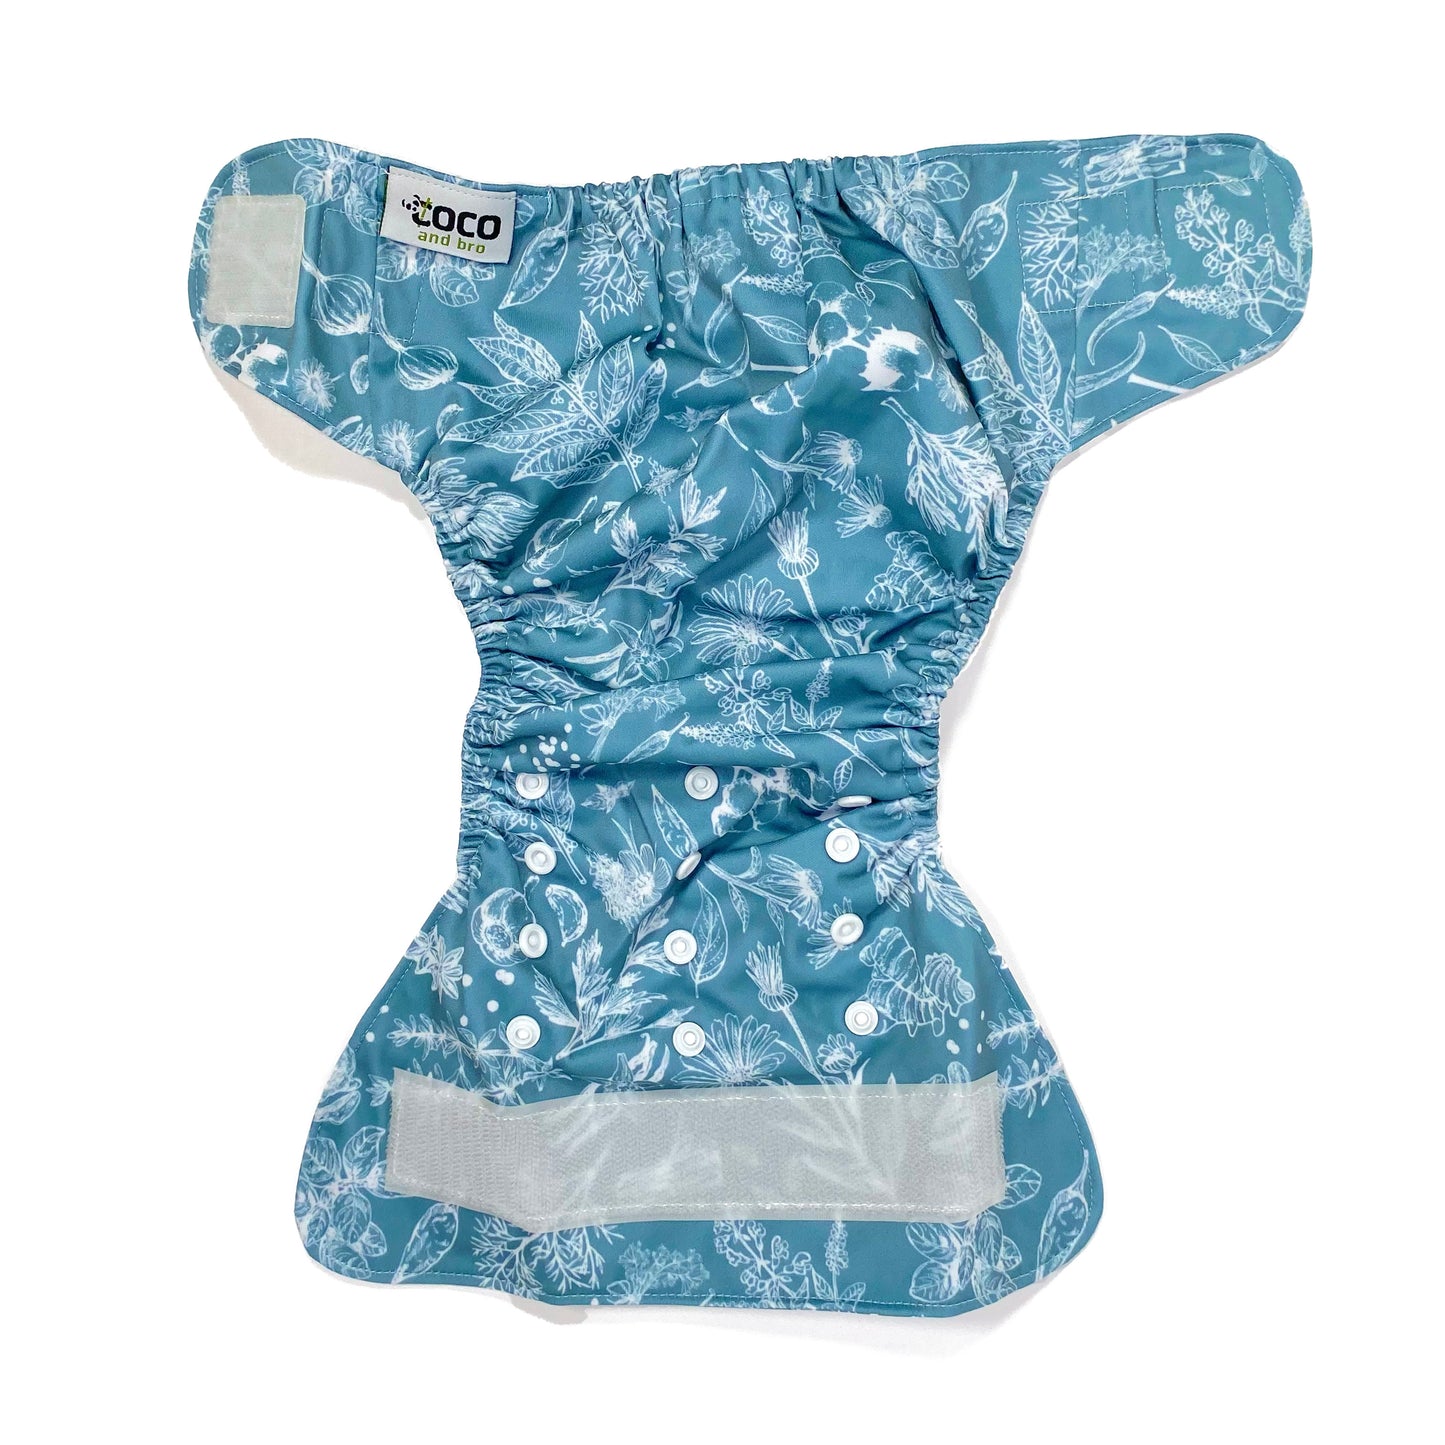 An adjustable reusable nappy for babies and toddlers, featuring a blue harvest design, with white images of various crops on a blue background. View shows the full outside pattern of the nappy, with fastenings open.